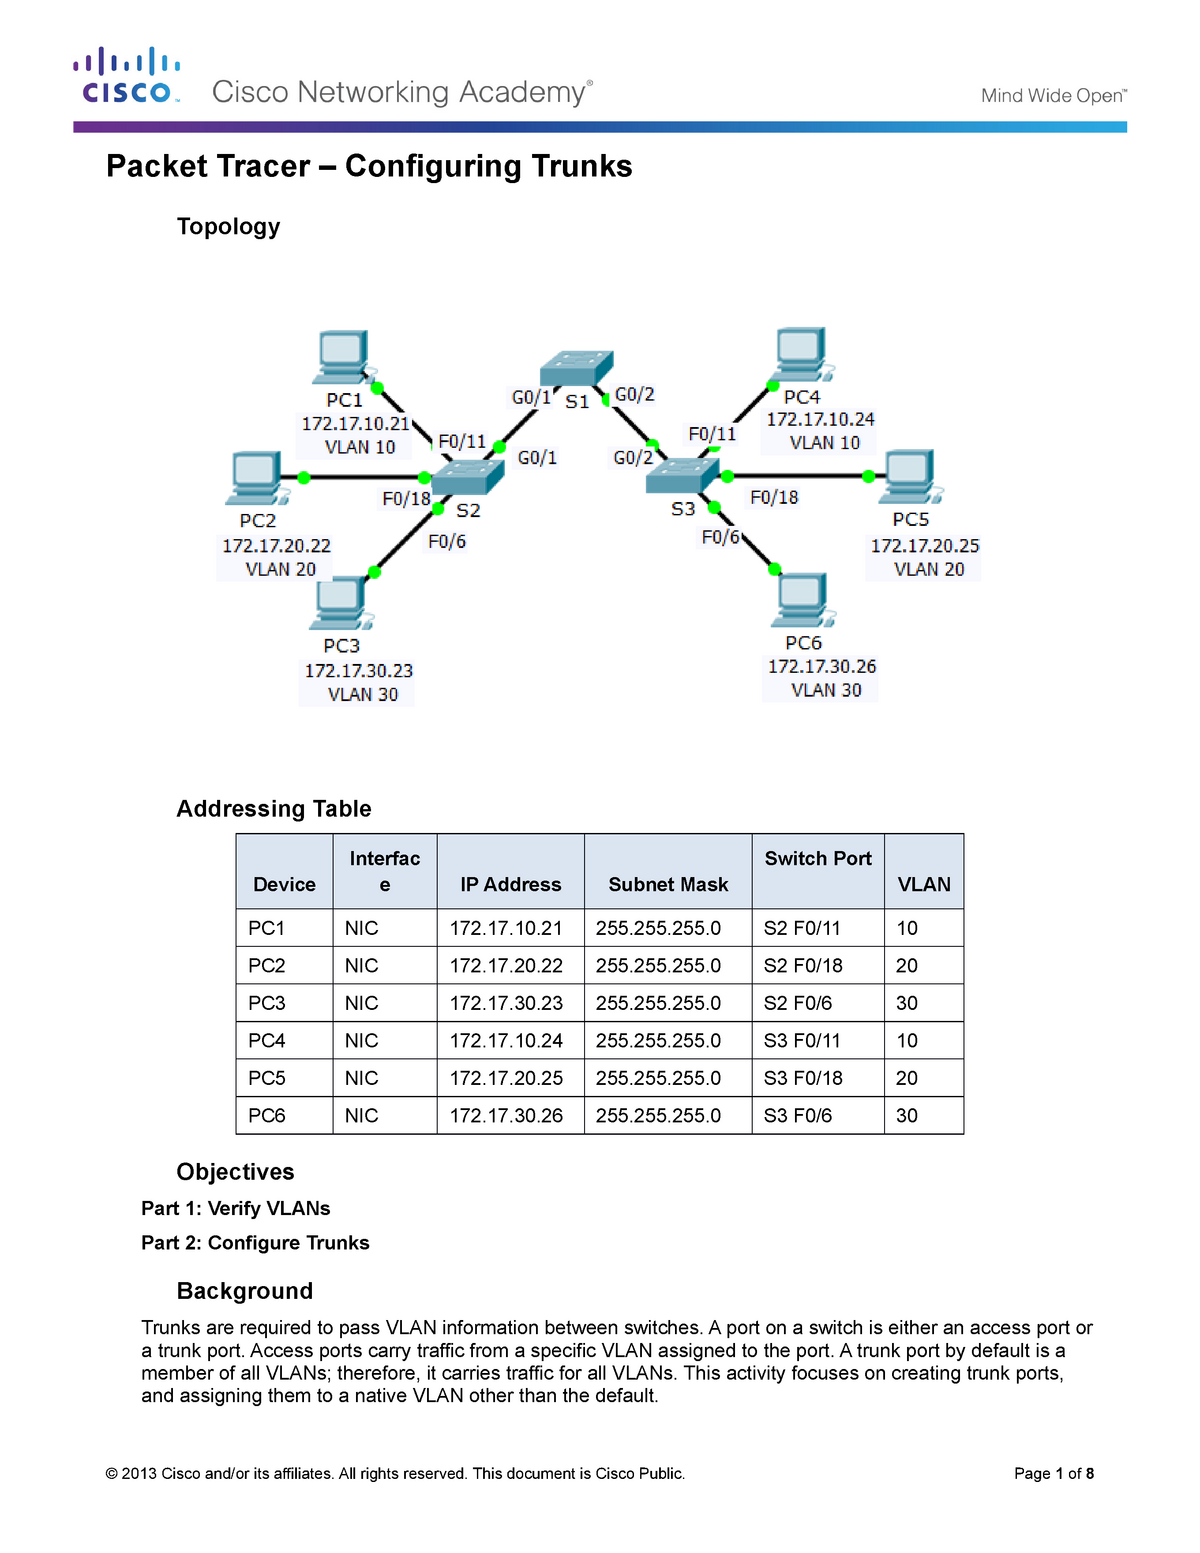 6.2 2.4 packet tracer